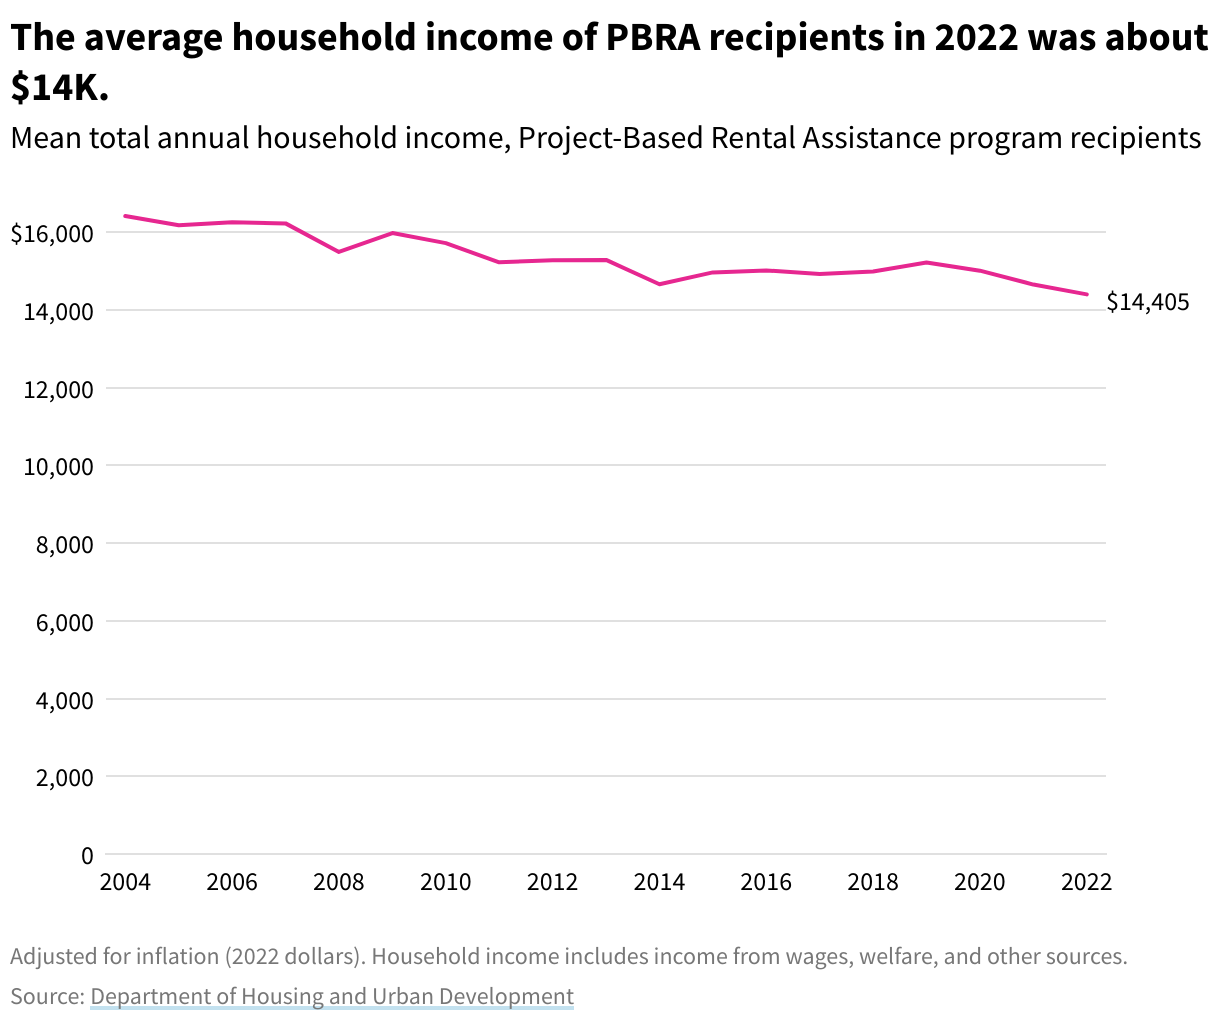 Line chart showing mean total annual household income of Project-Based Rental Assistance program recipients. In 2022, the figure is $14,405.